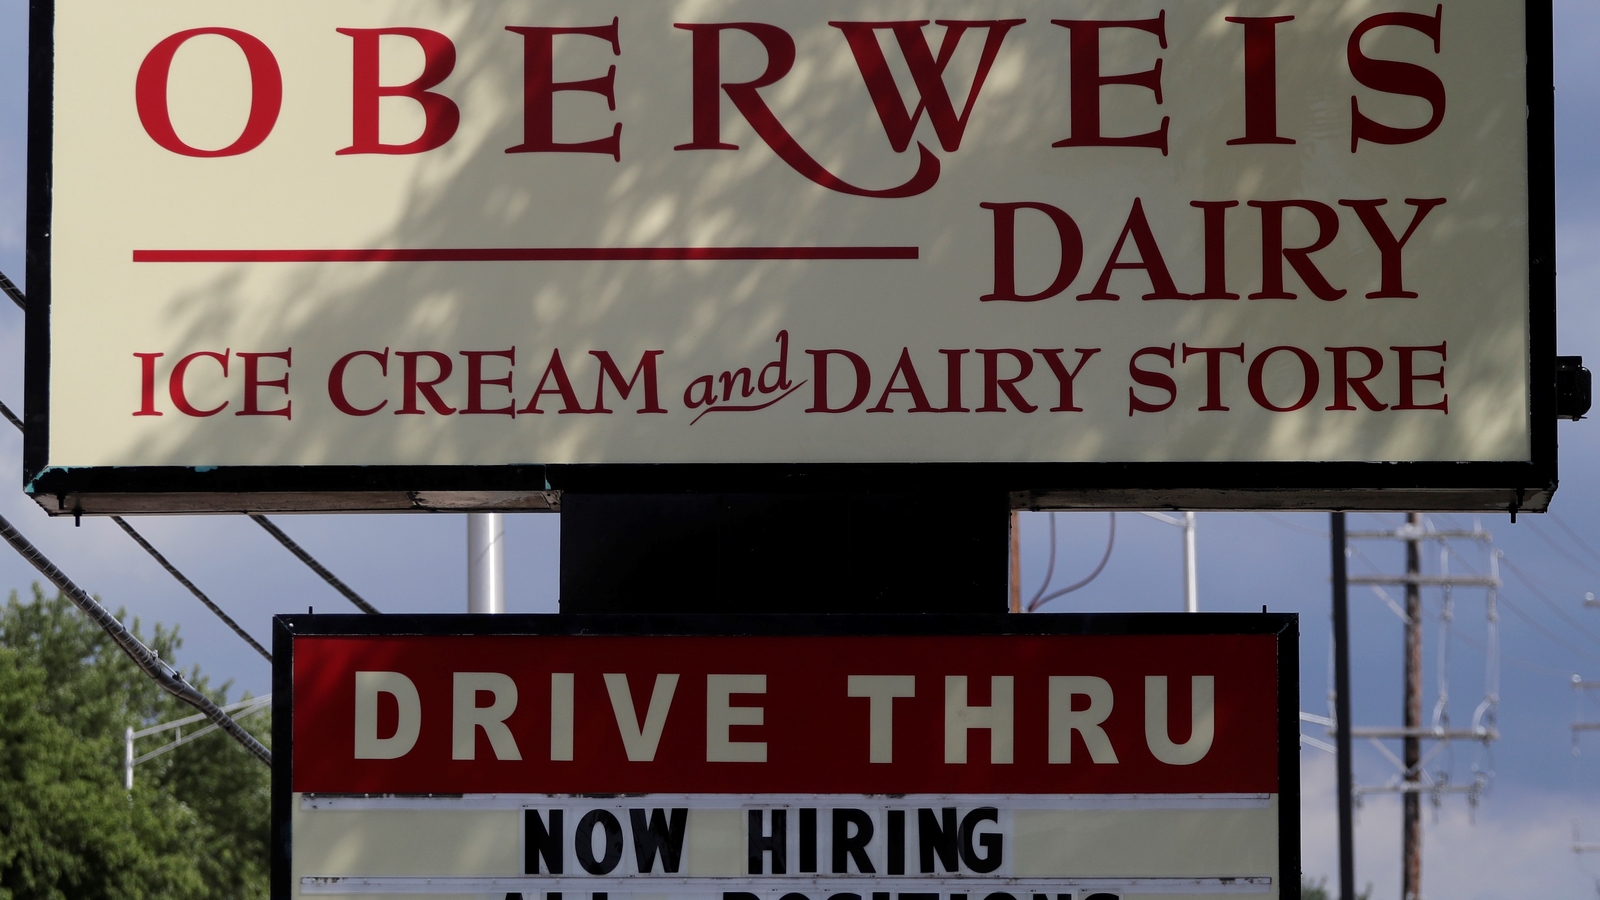 90-Year-Old Brand Oberweis Ice Cream Filing for Chapter 11 Bankruptcy